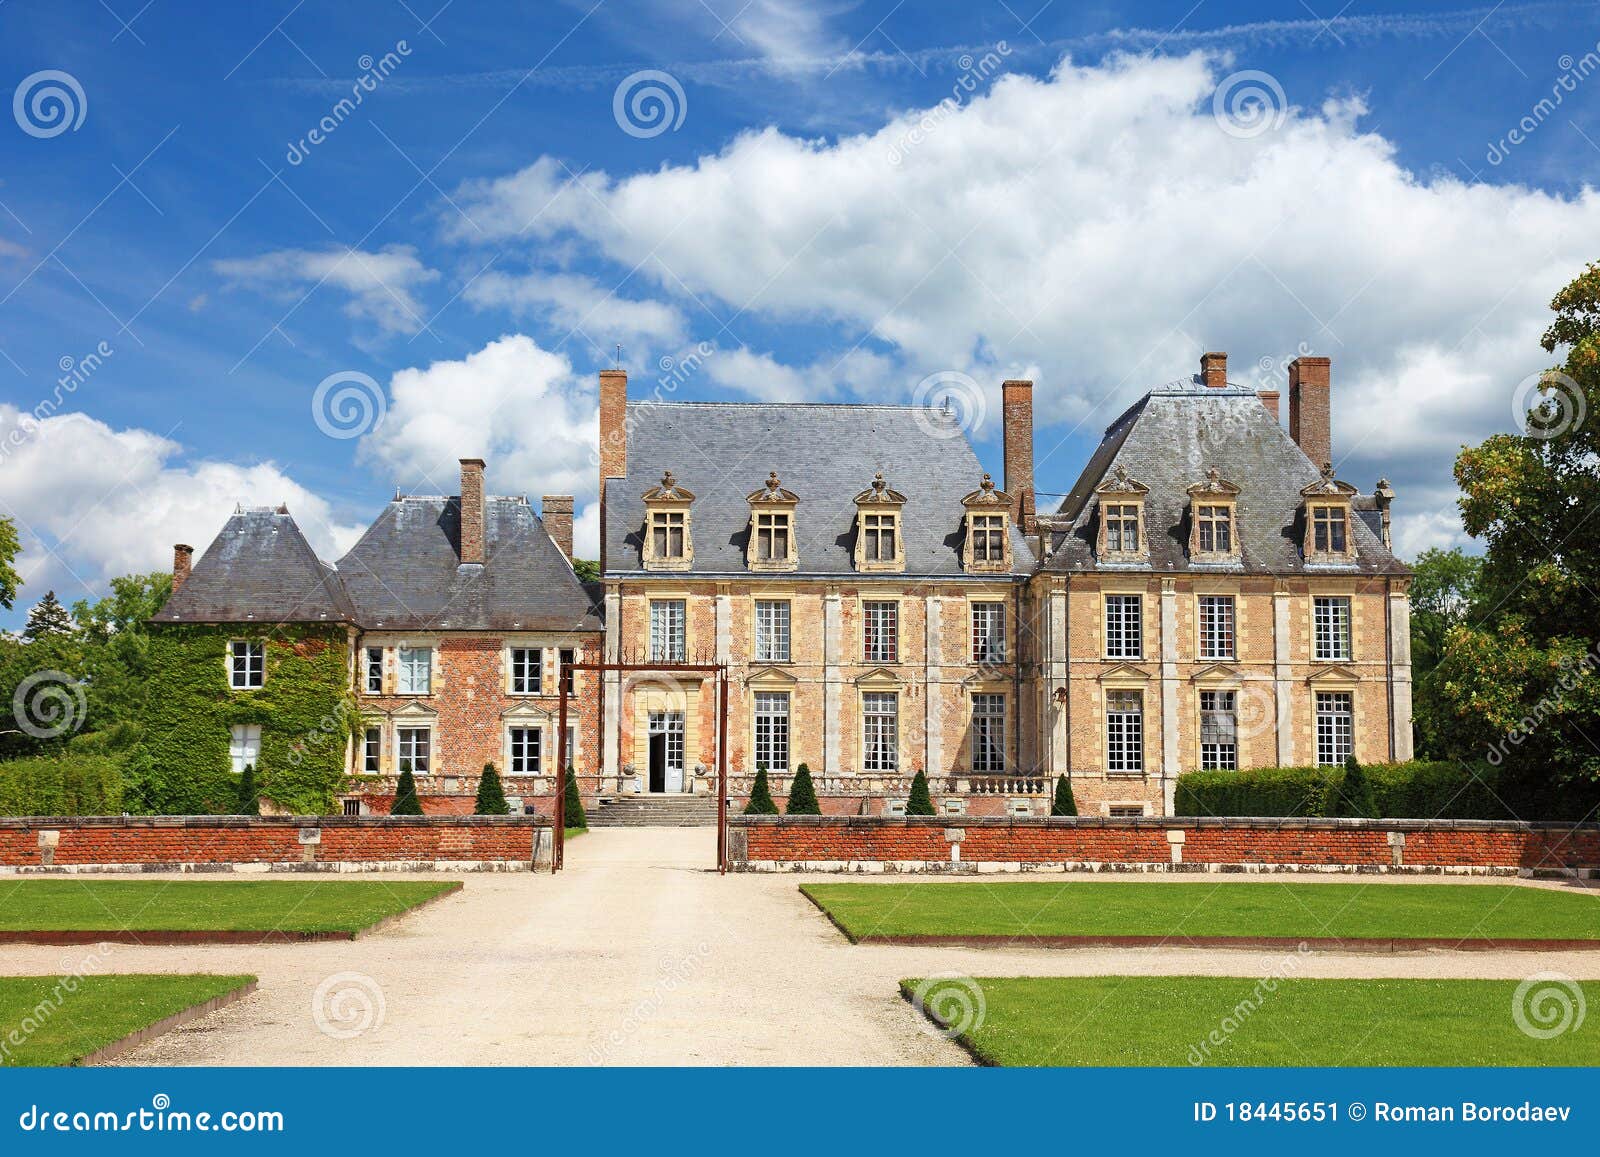 manor house luxury home mansion exterior french england wealth big country stone large english old property landscape uk houses